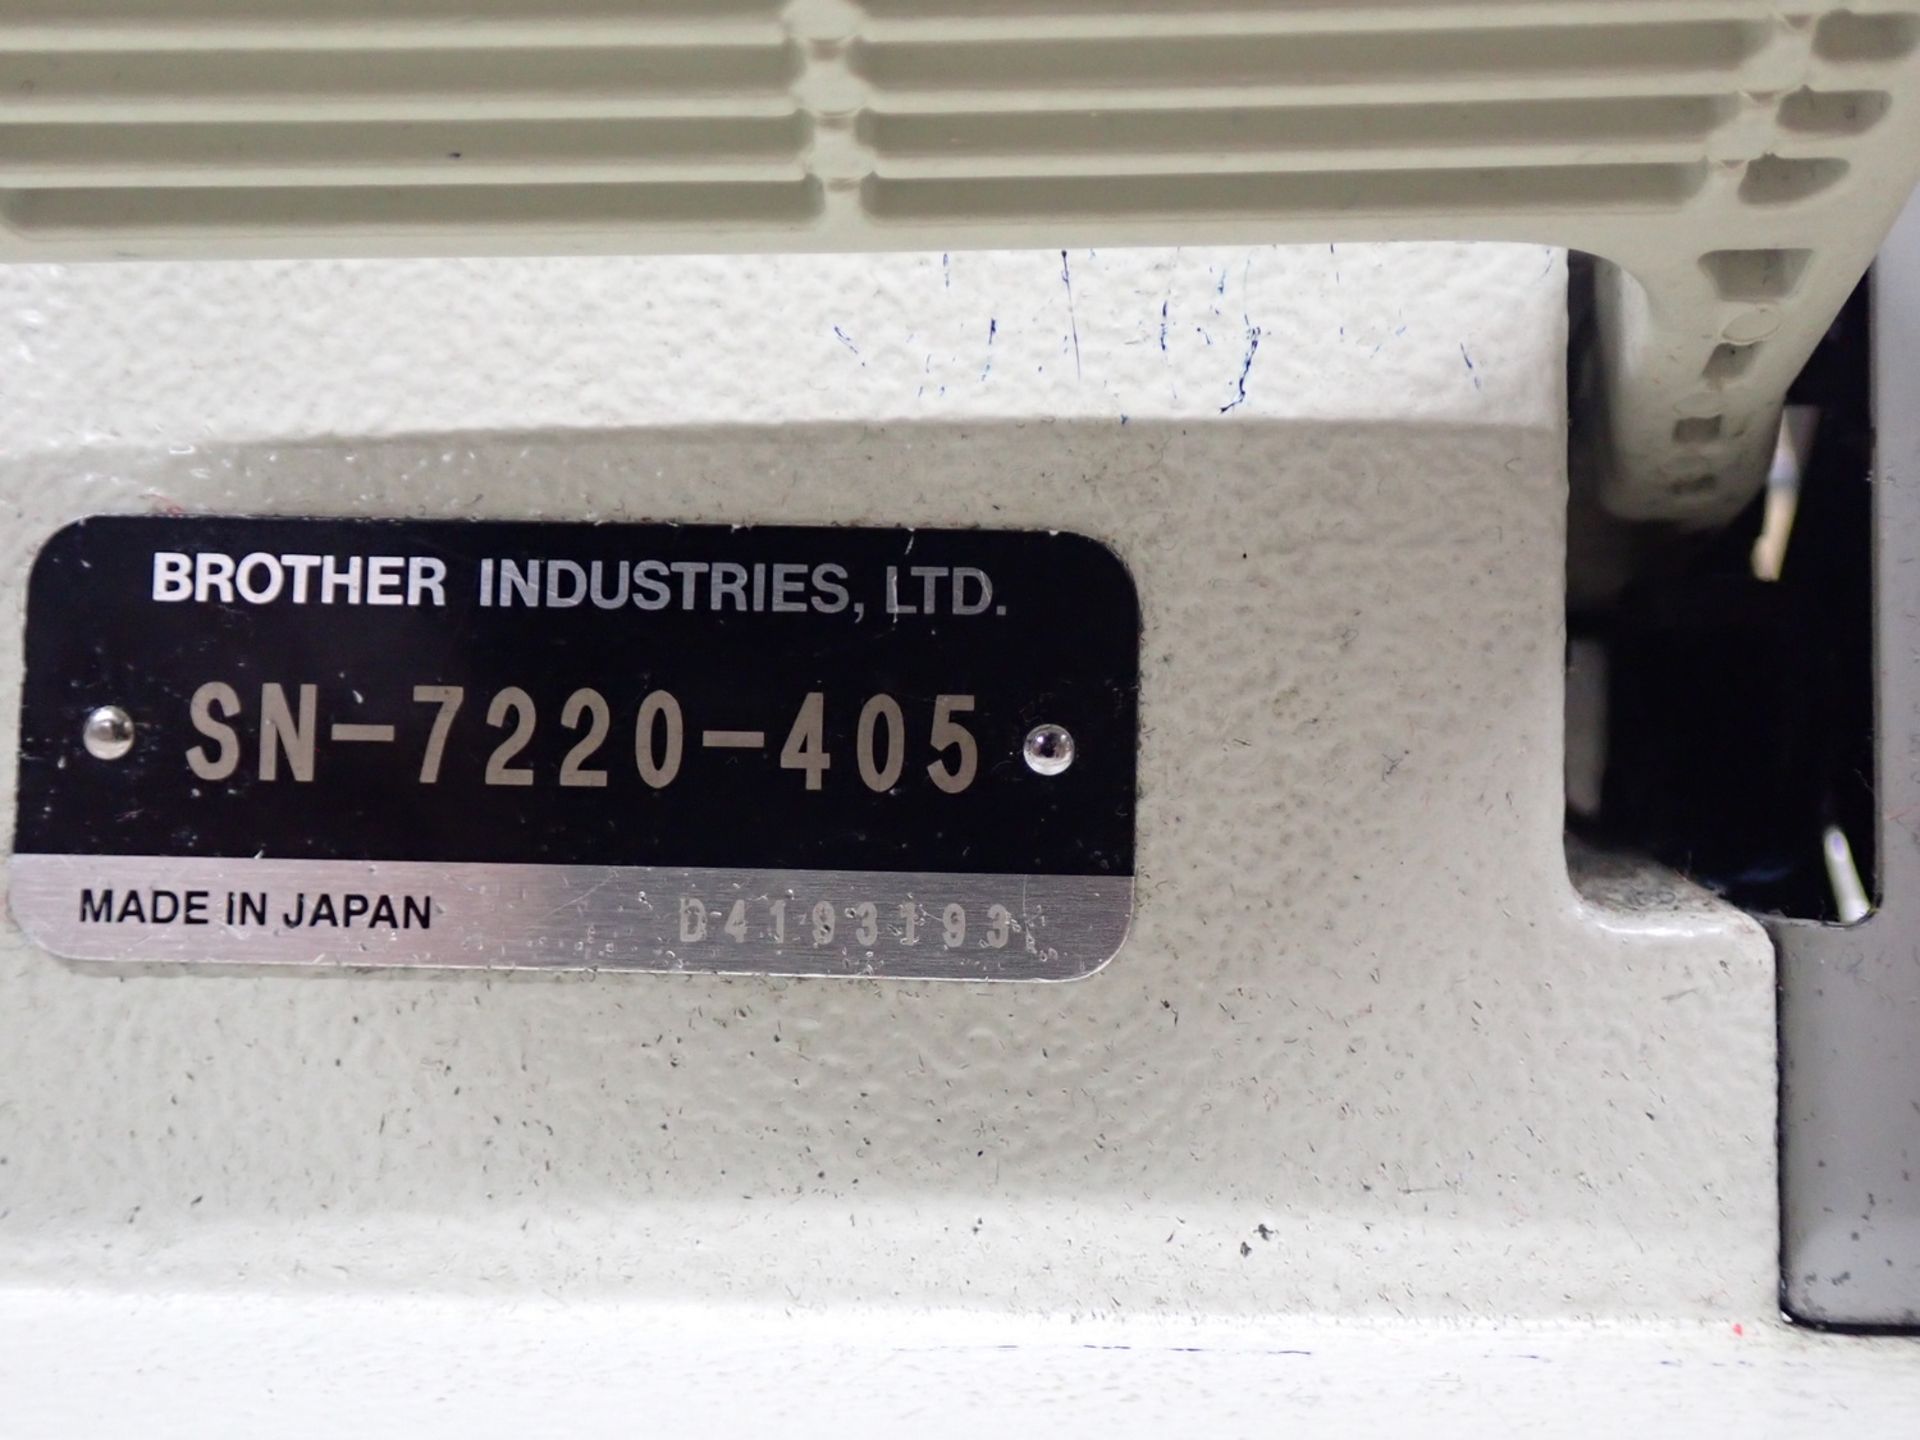 BROTHER SN-7220-405 SGLE NEEDLE W/ F40 CONTROLLER (110V) - Image 2 of 6